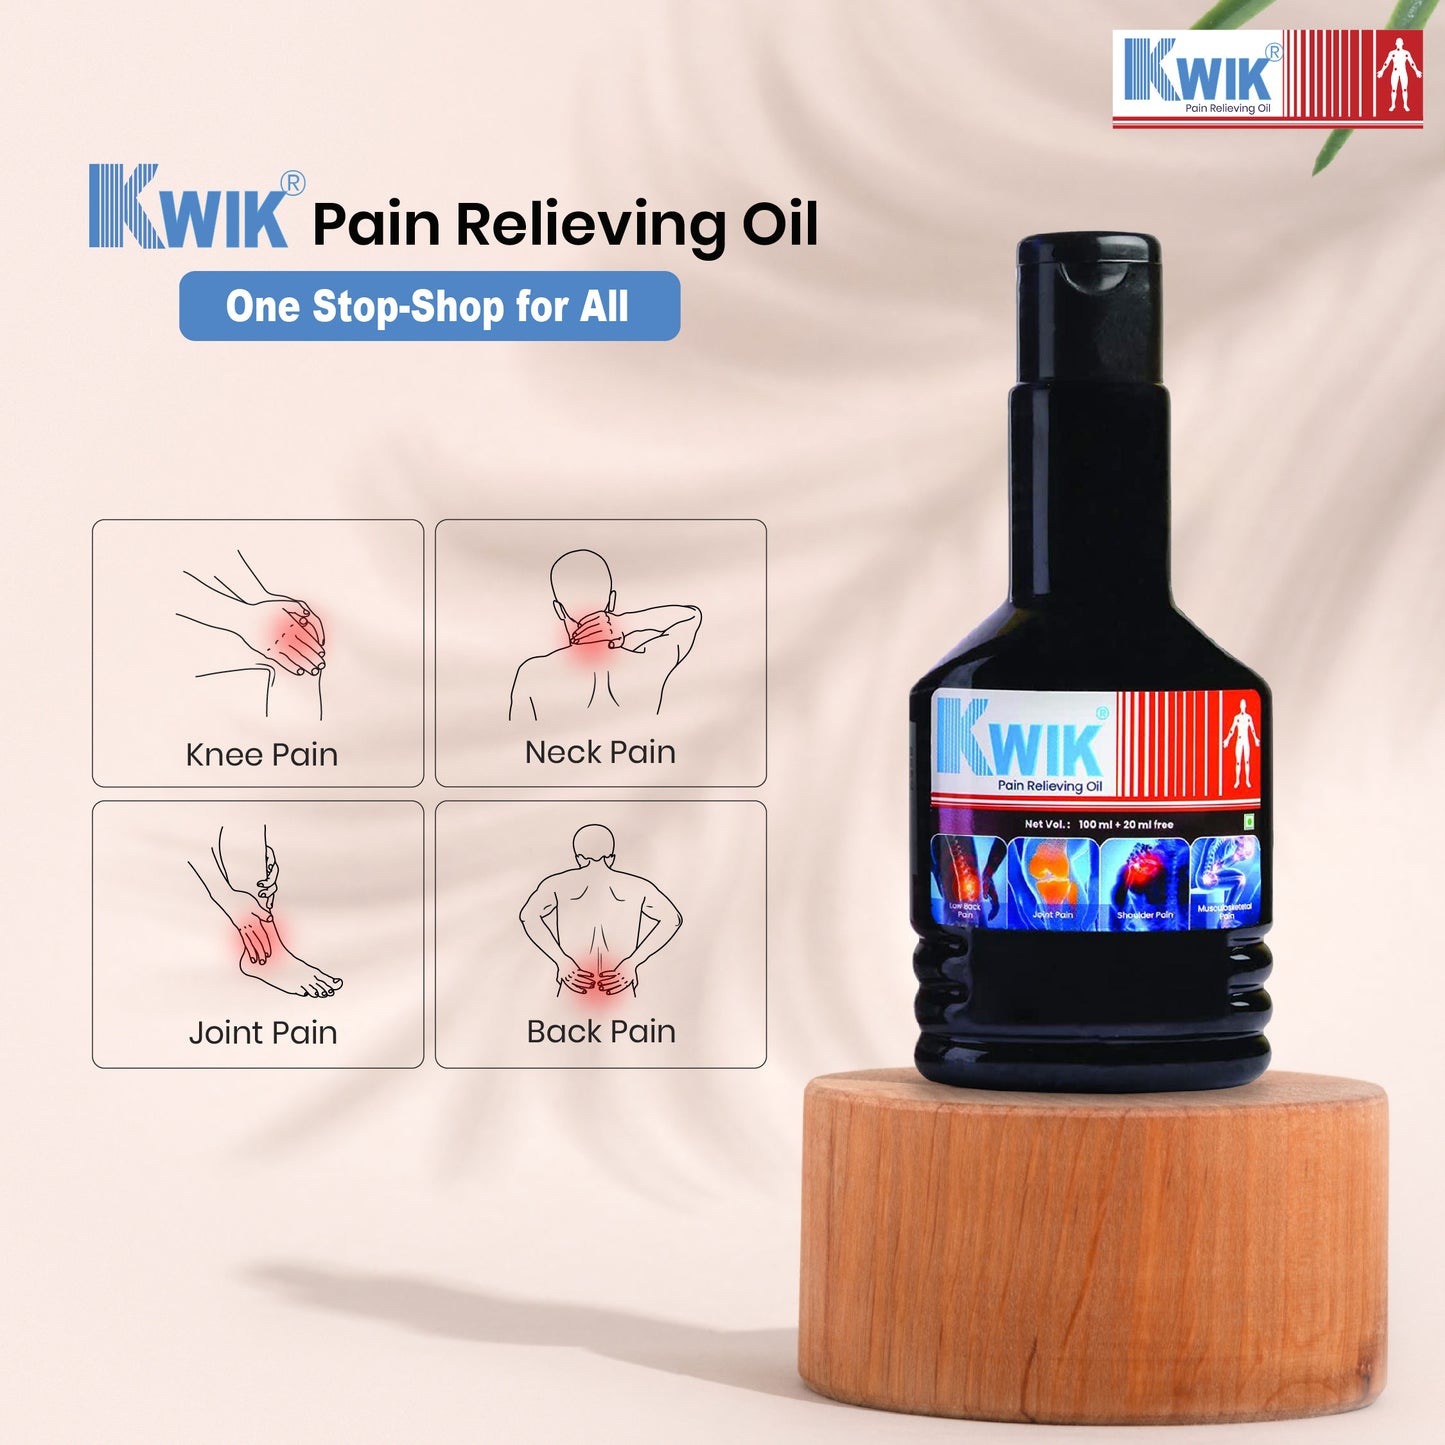 Kwik Pain Relieving oil - One stop shop for all